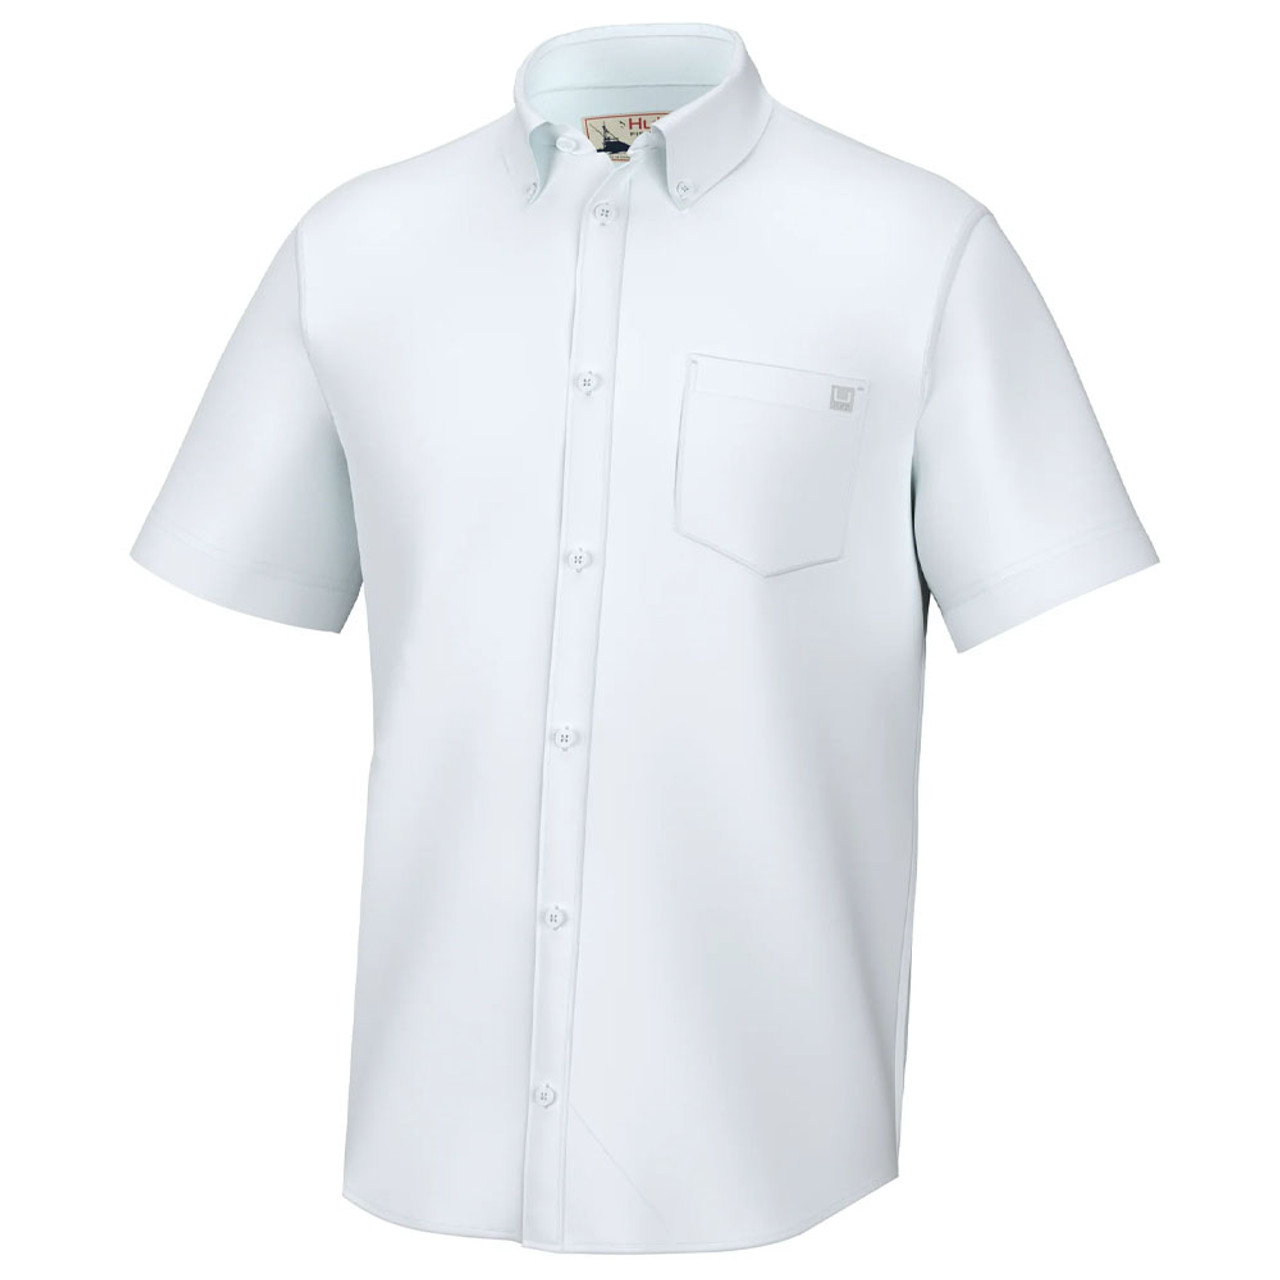 Huk Men's Tide Point Solid Woven Button Down Short Sleeve Shirt